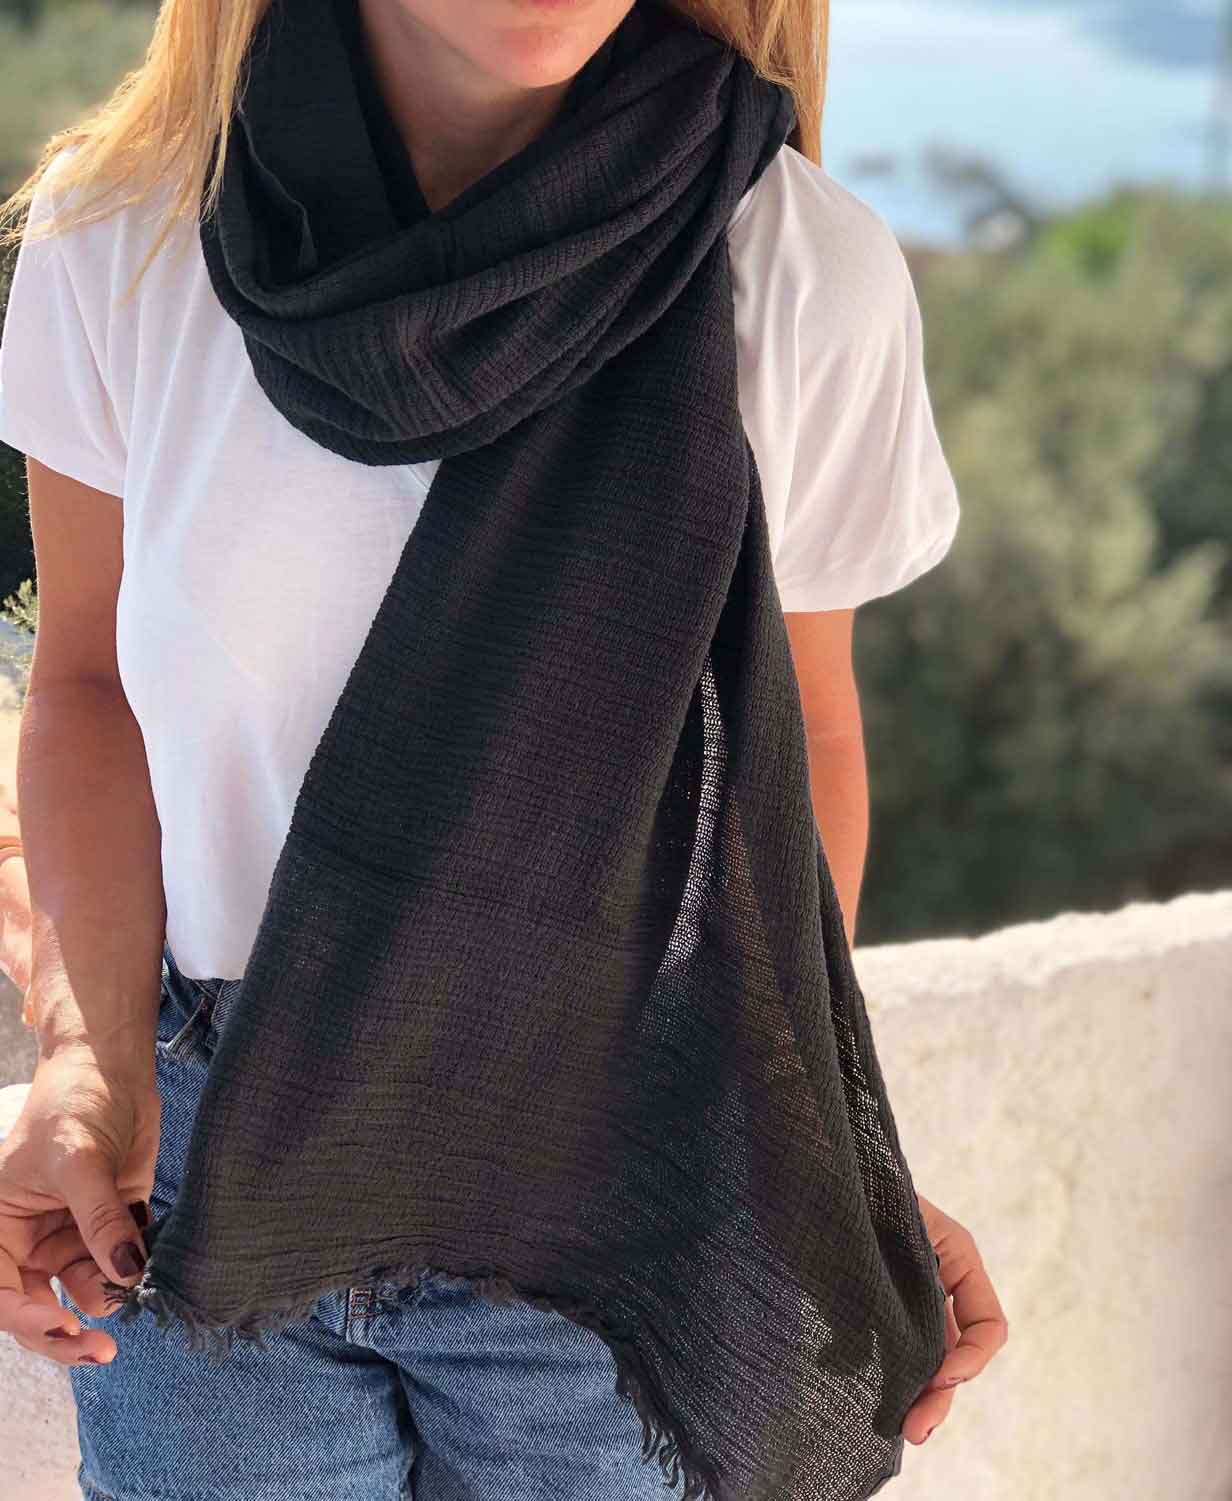 100% Organic Cotton Scarf, Dark Gray Soft Shawl, Spring Autumn Scarf, Scarves for Women, Anthracite Grey Color Scarf, Christmas Gift for Mom